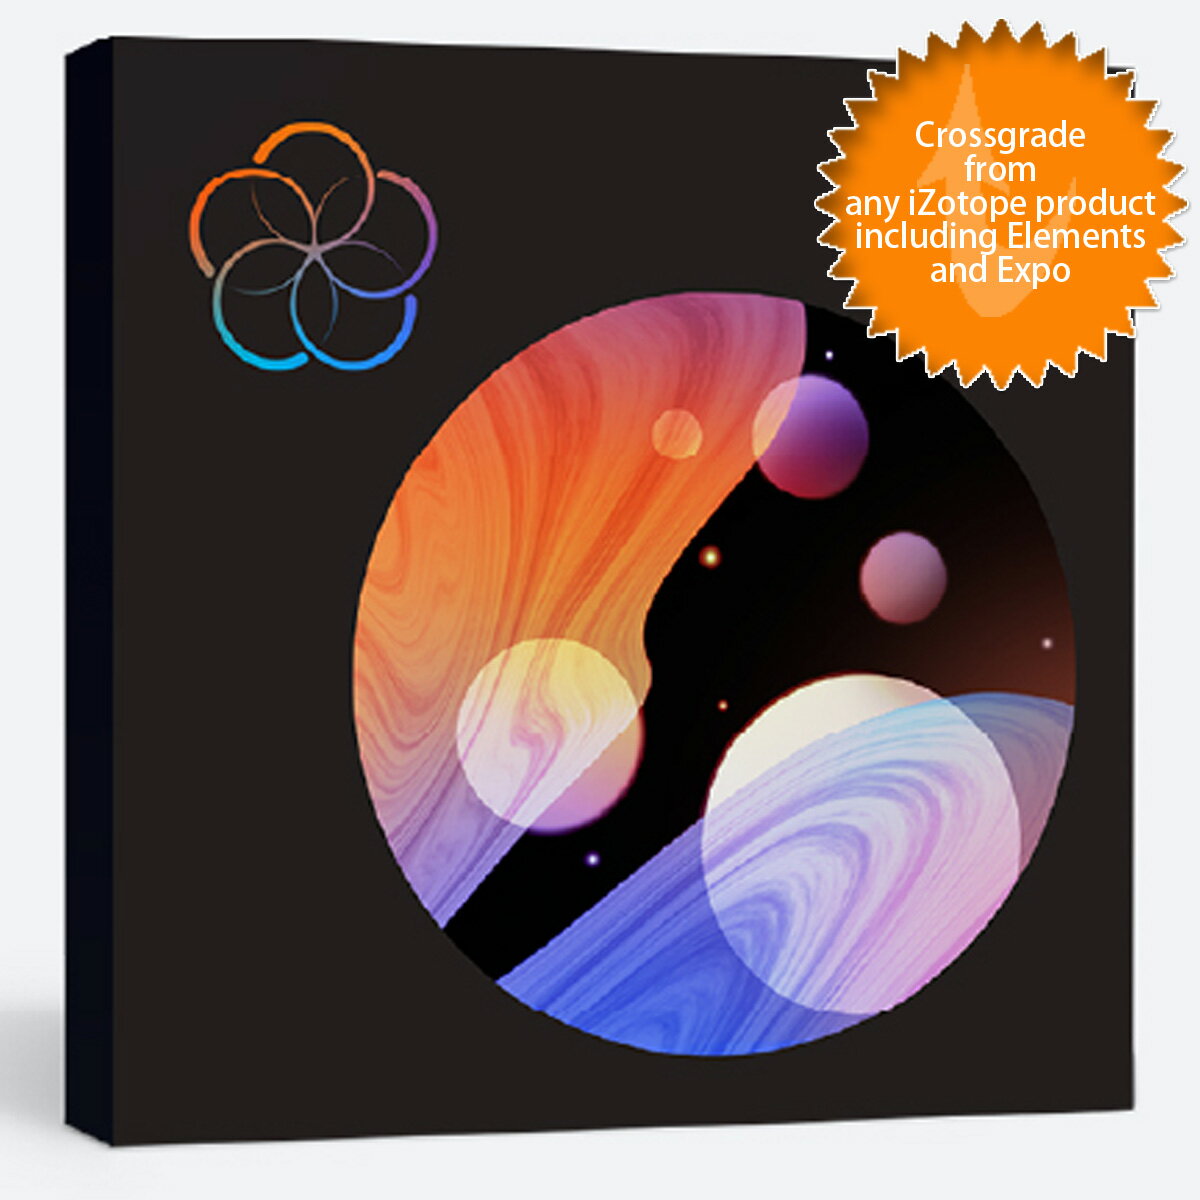 iZotope / Mix & Master Bundle Advanced Crossgrade from any iZotope product, including Elements, and Expoڥǥ᡼Ǽ ԲġۡPNG